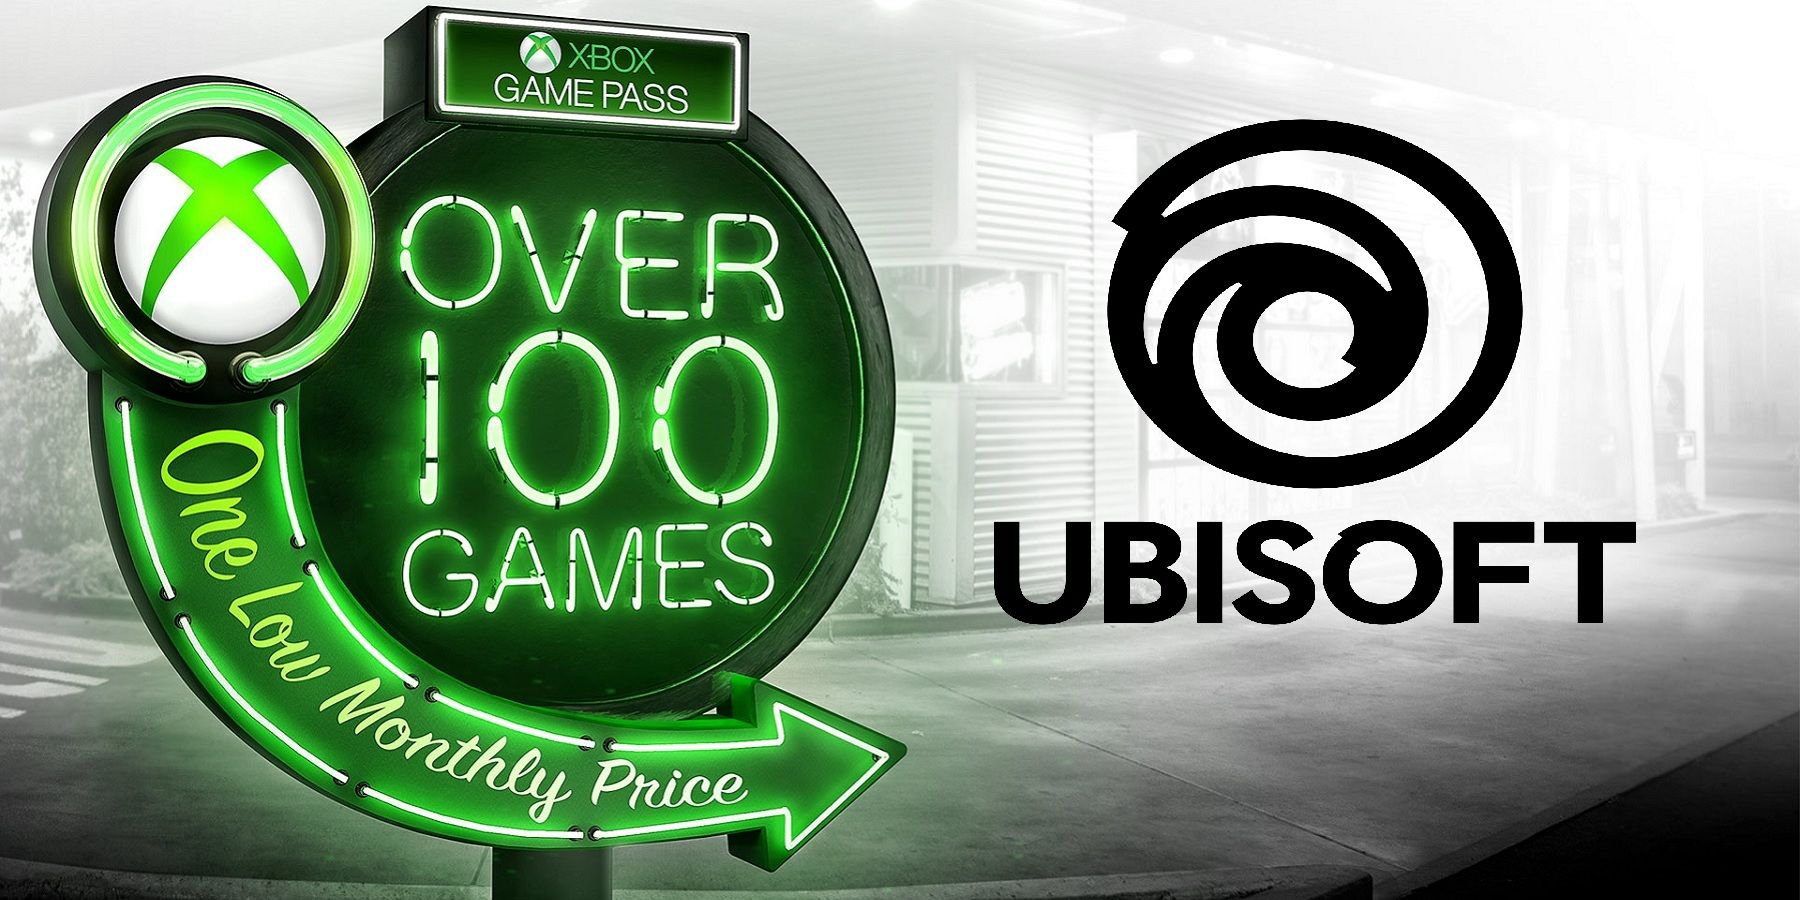 xbox game pass neon sign with ubisoft logo